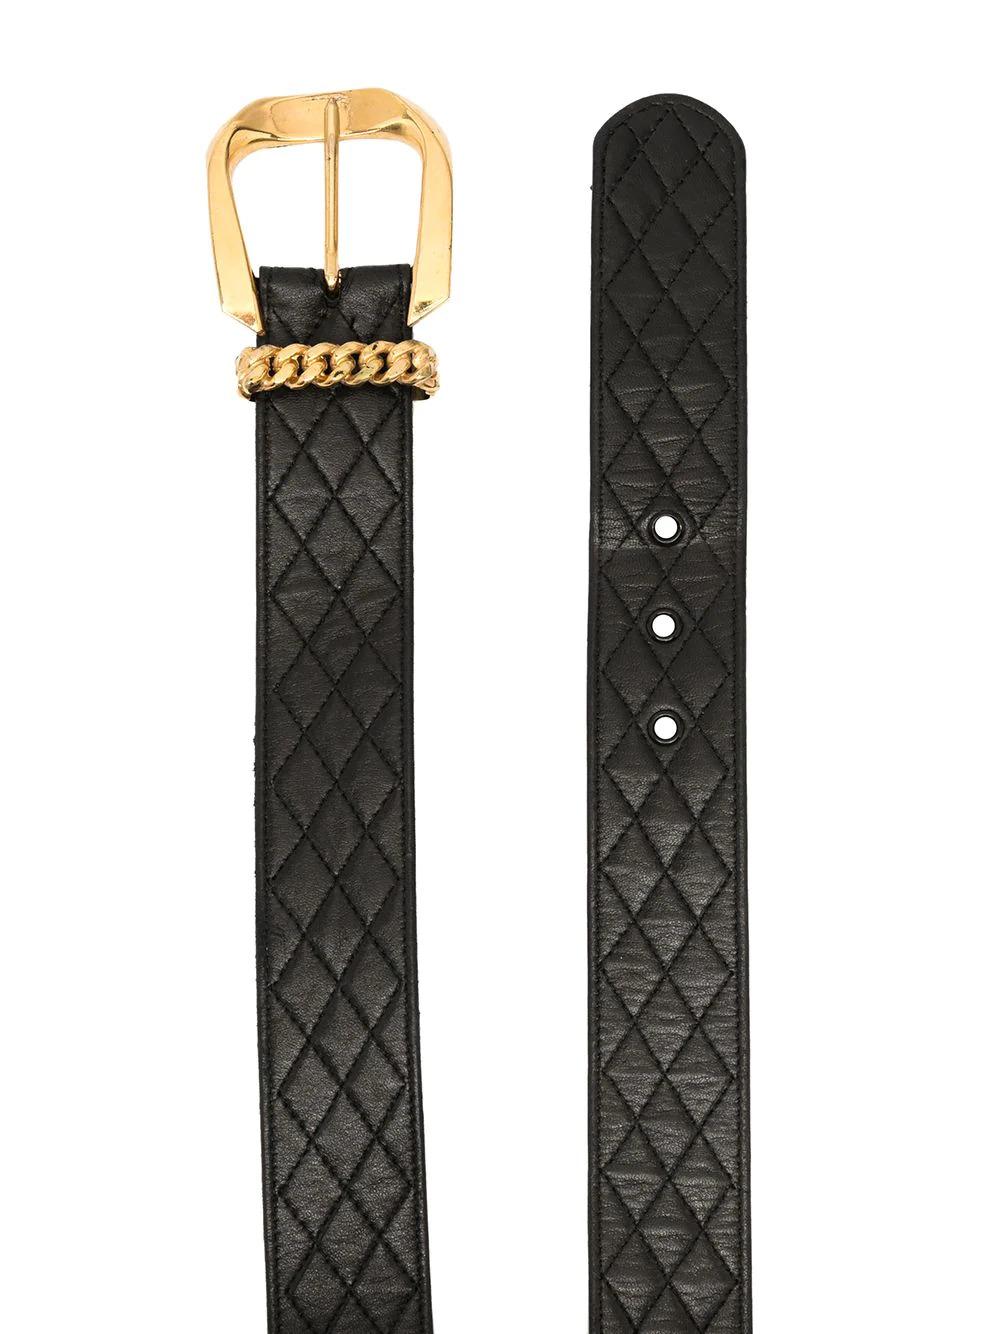 Take your accessories repertoire to whimsical heights with this vintage Chanel belt. It was designed in 1980, before Karl Lagerfeld had been inducted to creative director of the house. Imbued with a playfully feminine aesthetic, the belt features a